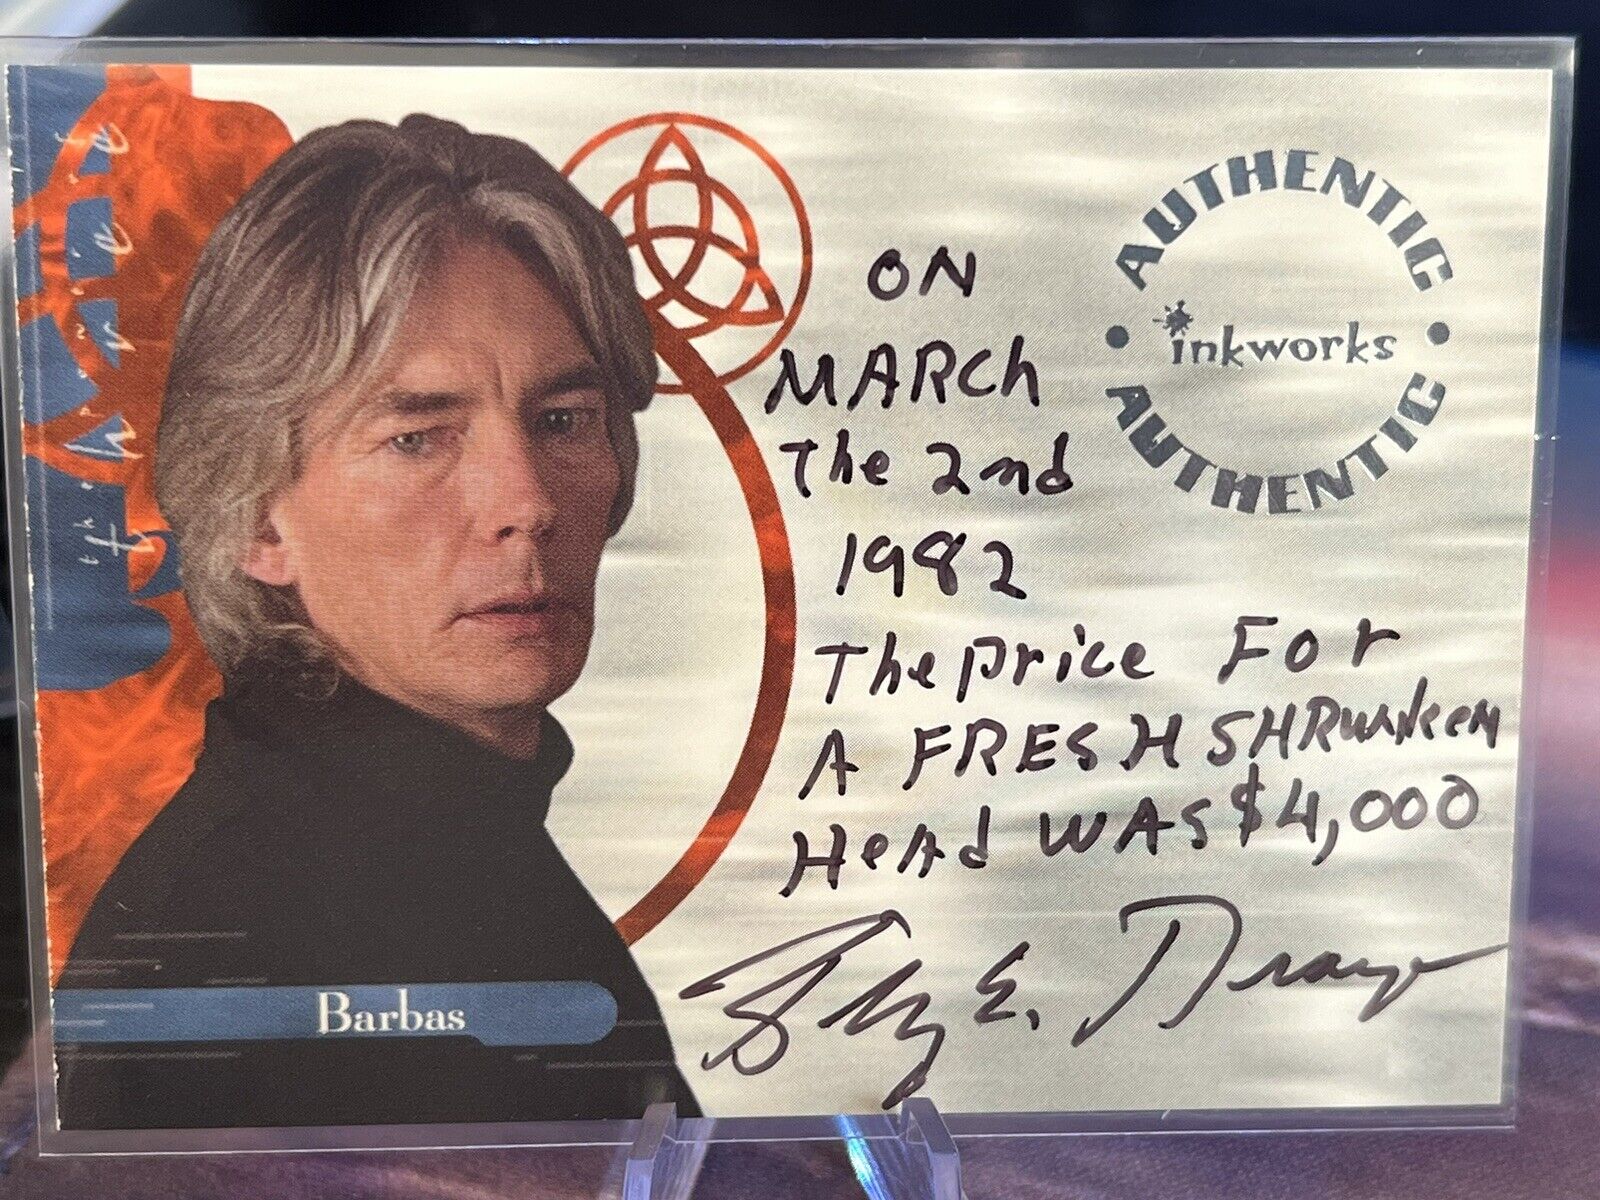 Charmed Power of Three Inkworks Autograph Card A11 Billy Drago as Barbas Auto